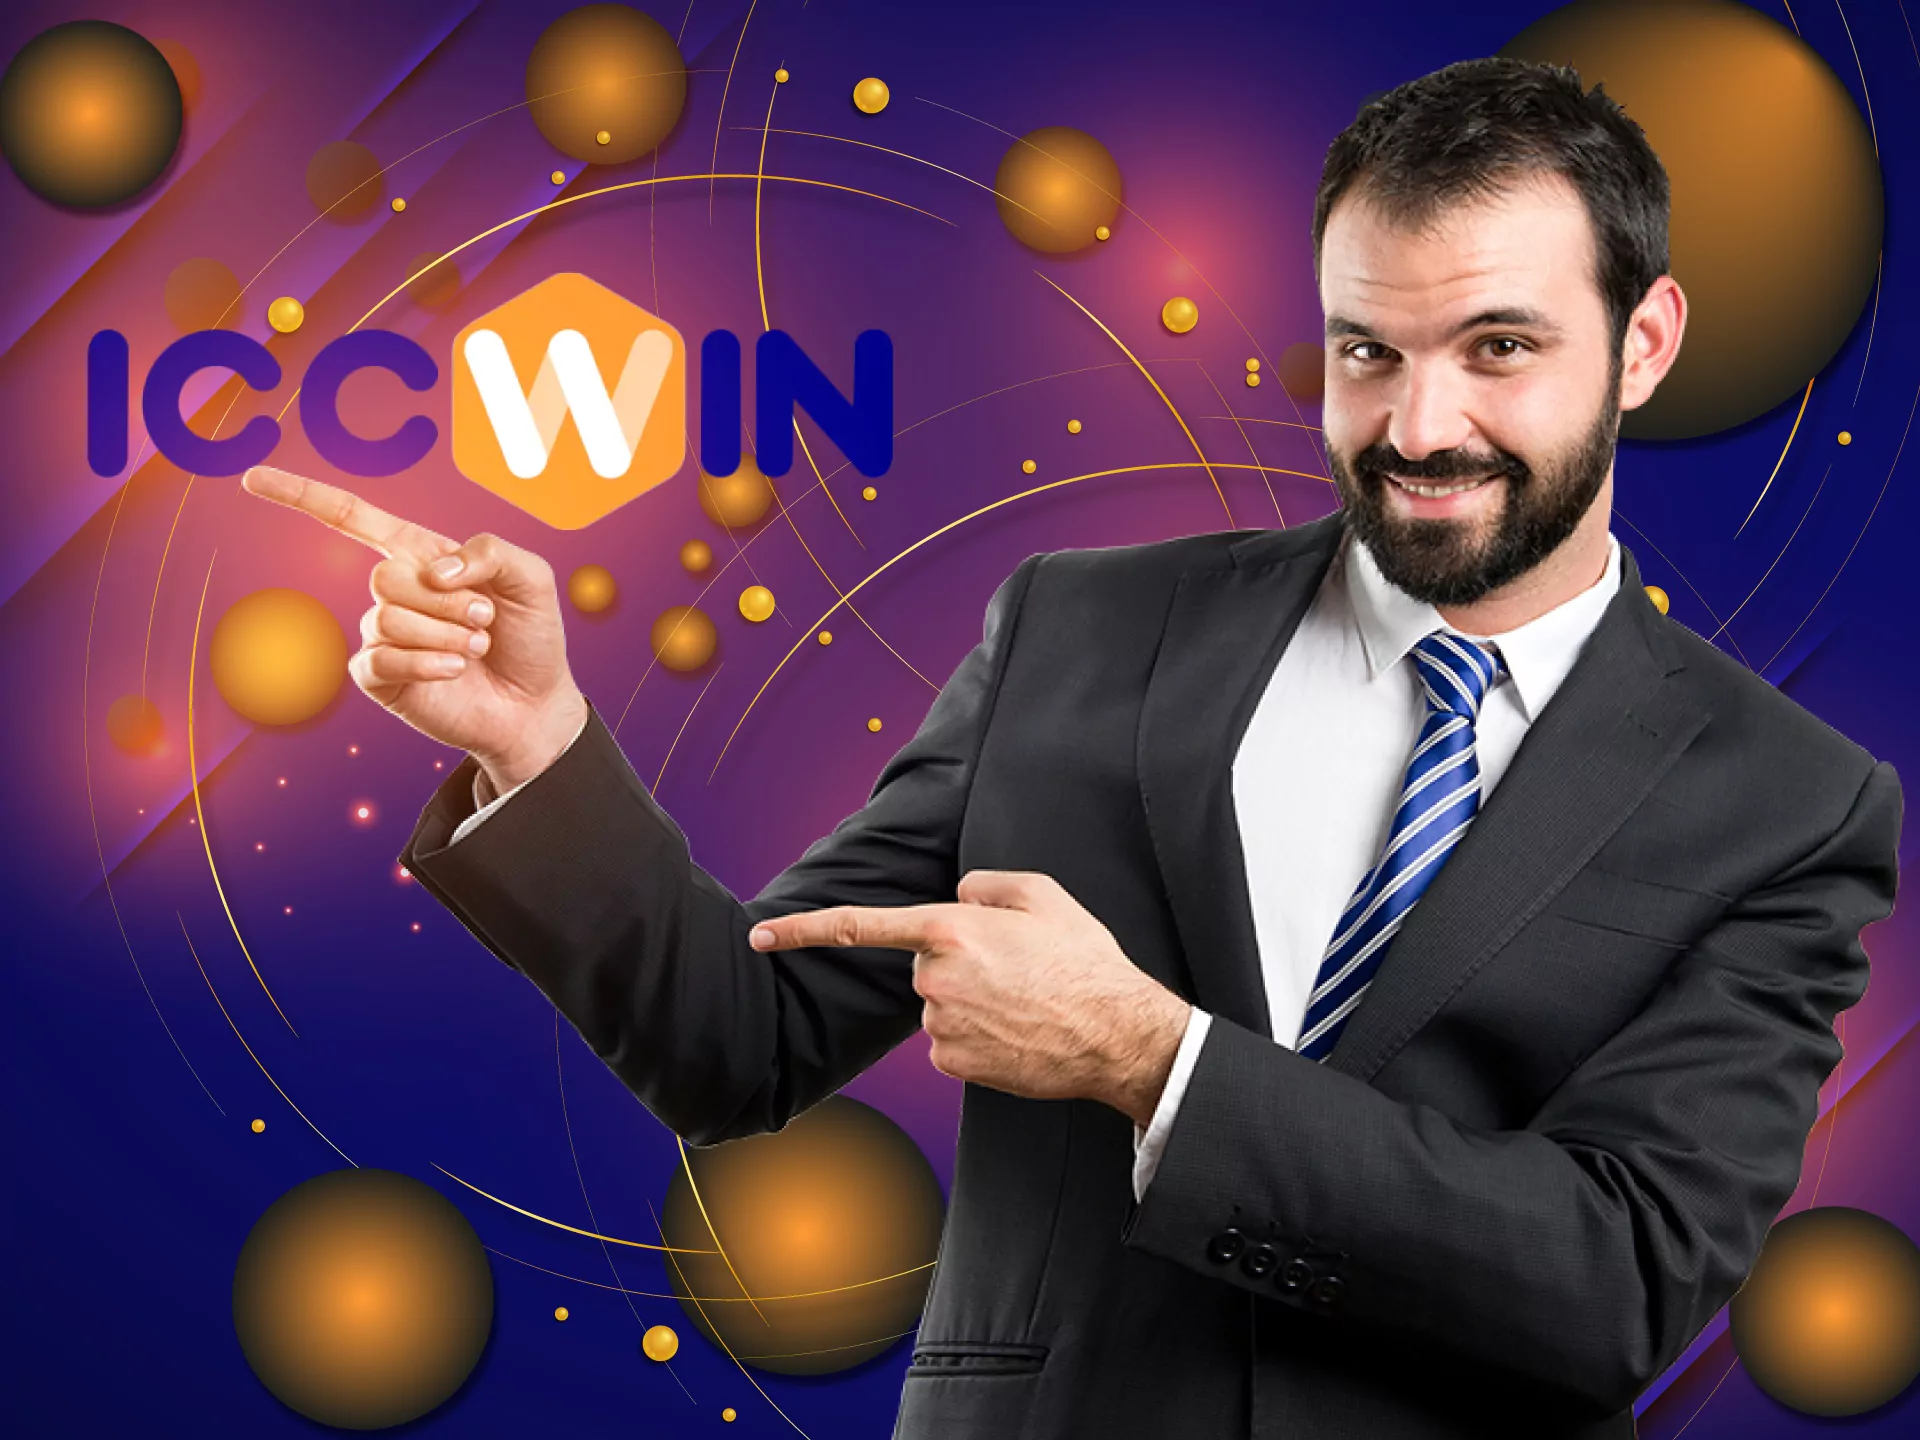 SIgn up for ICCWIN and start your betting journey.